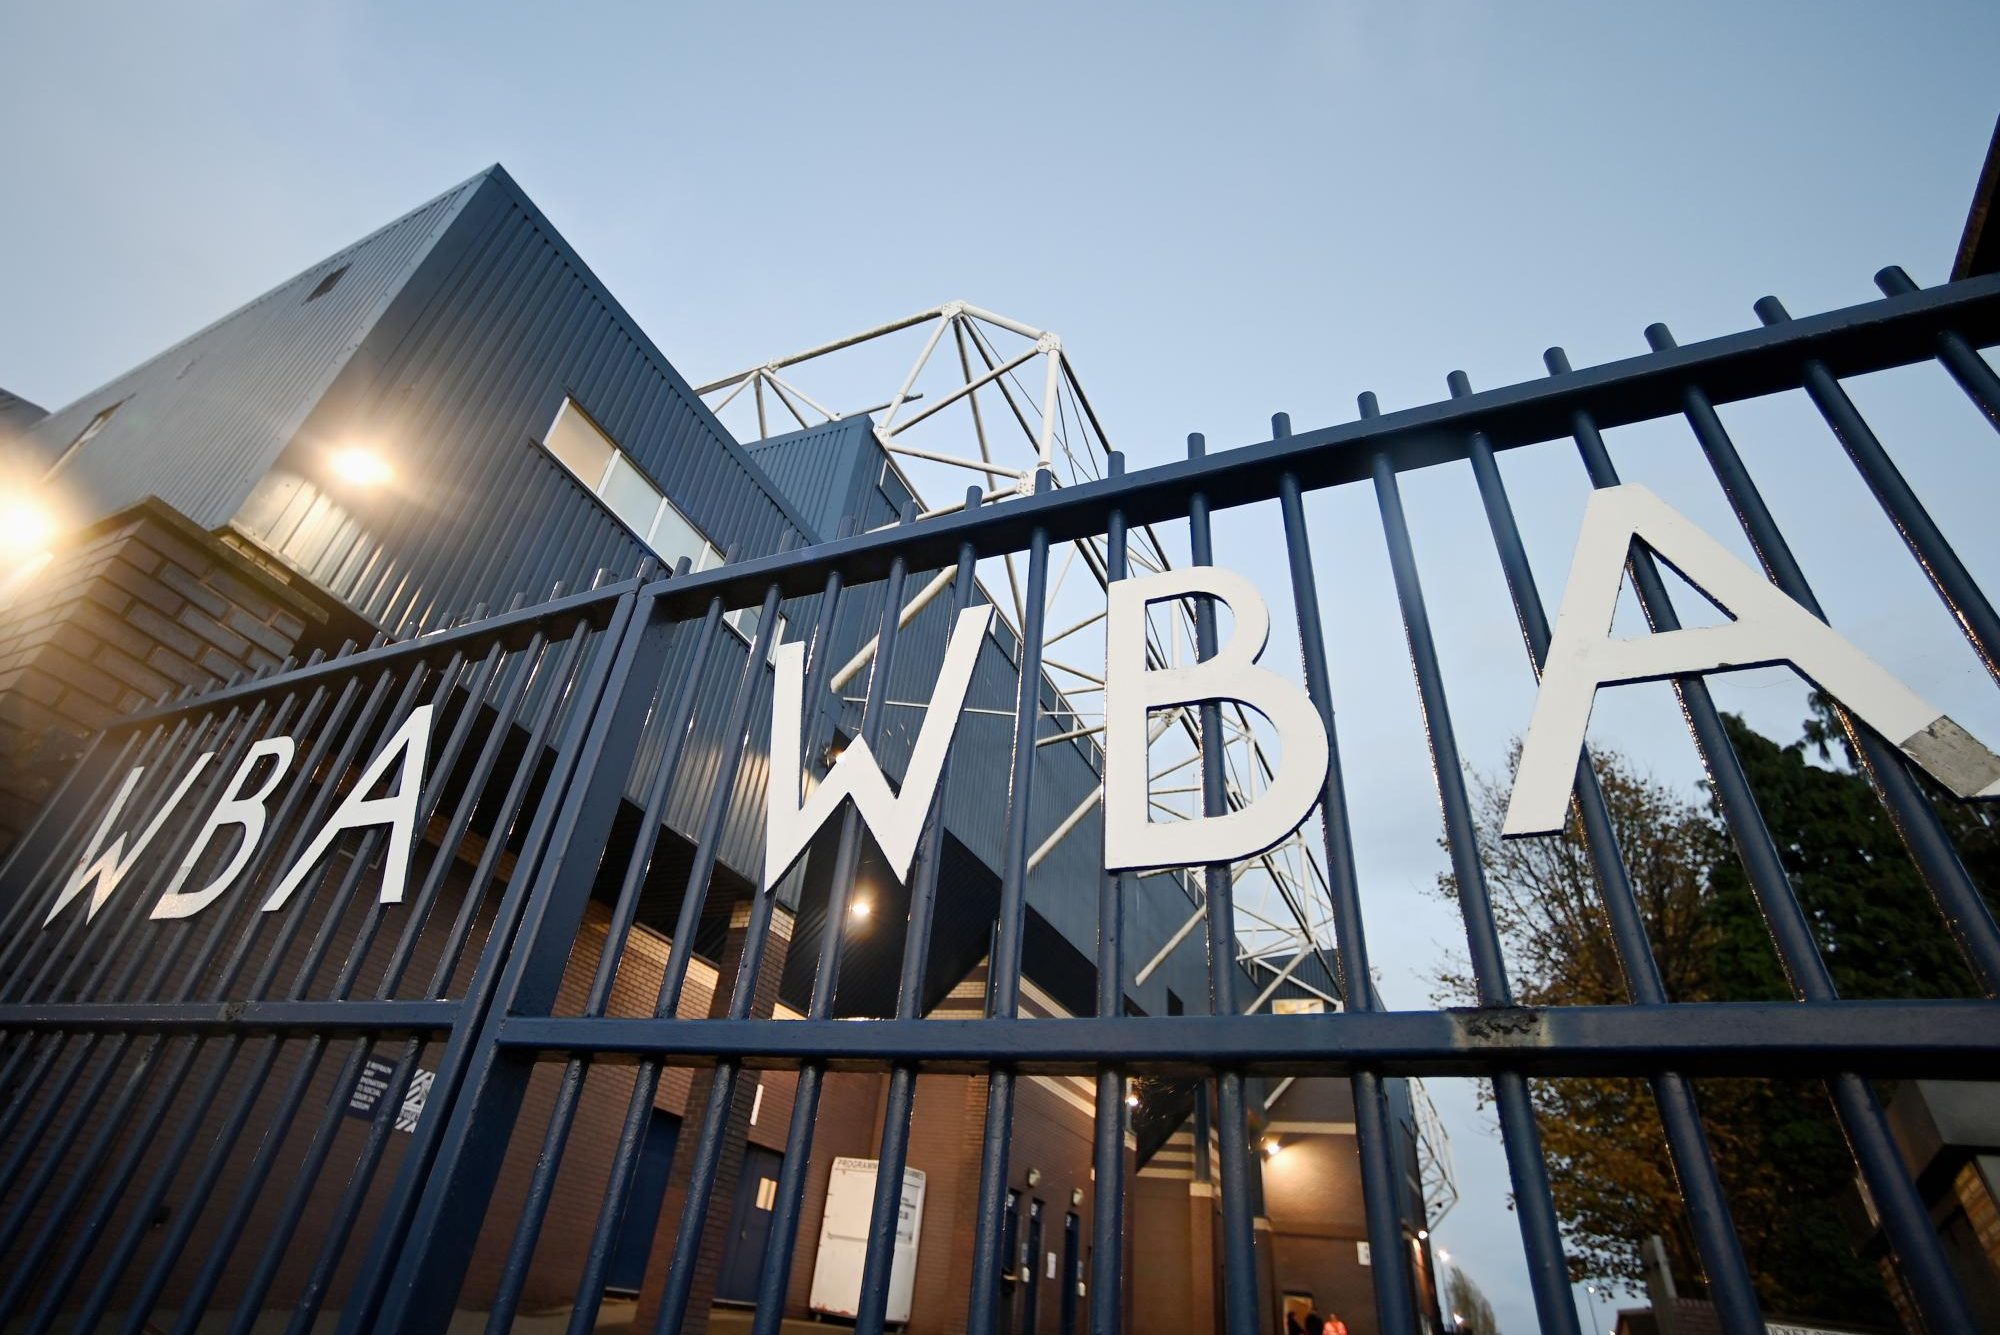 Florida-based businessman Shilen Patel completes 87.8% takeover of West  Bromwich Albion 